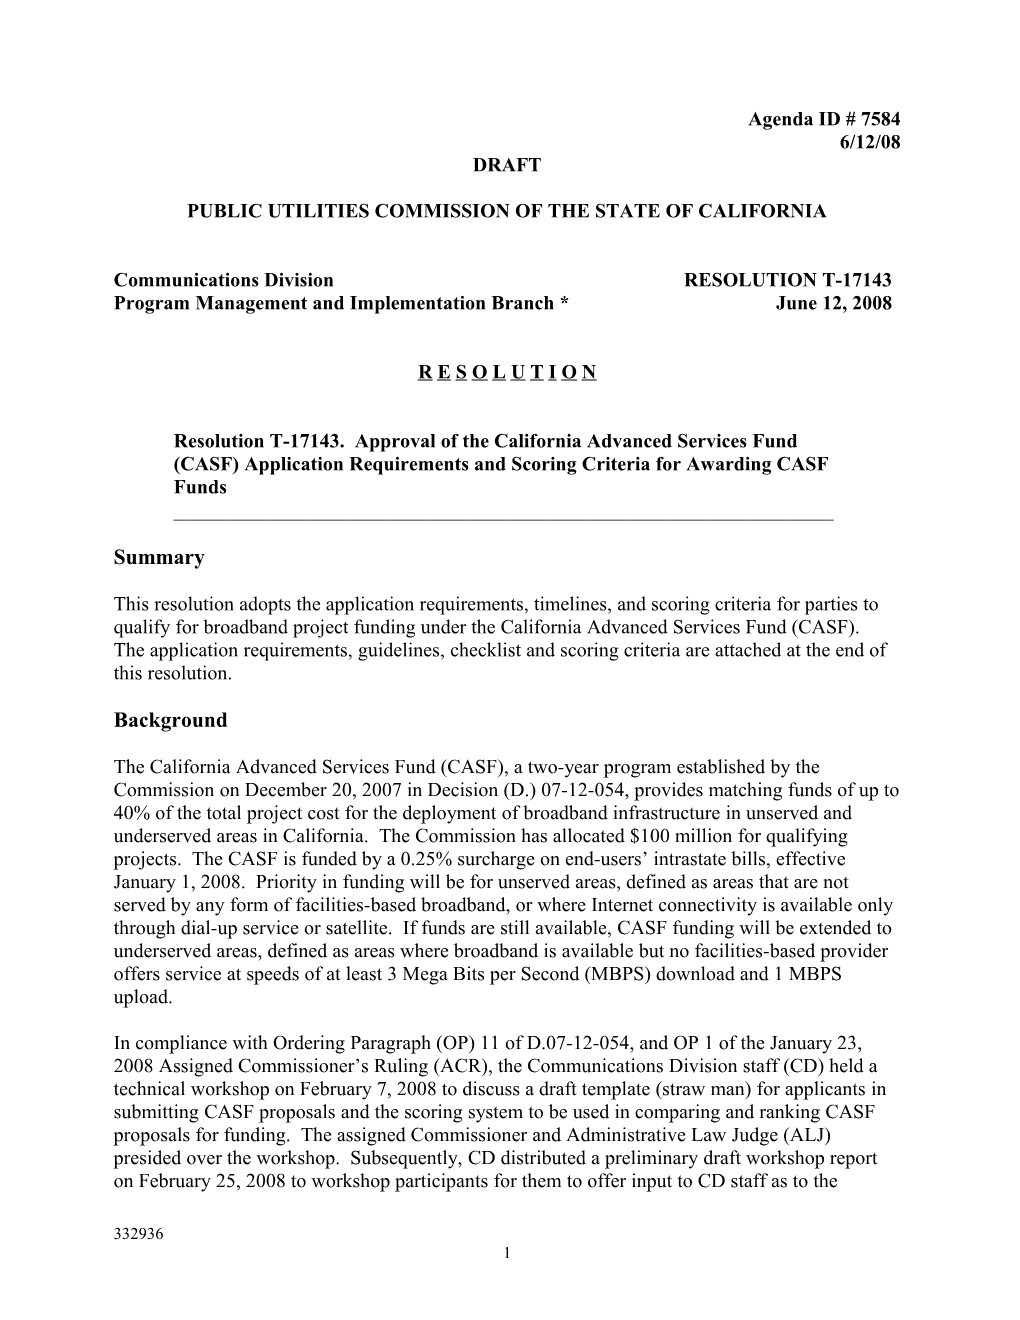 Public Utilities Commission of the State of California s7